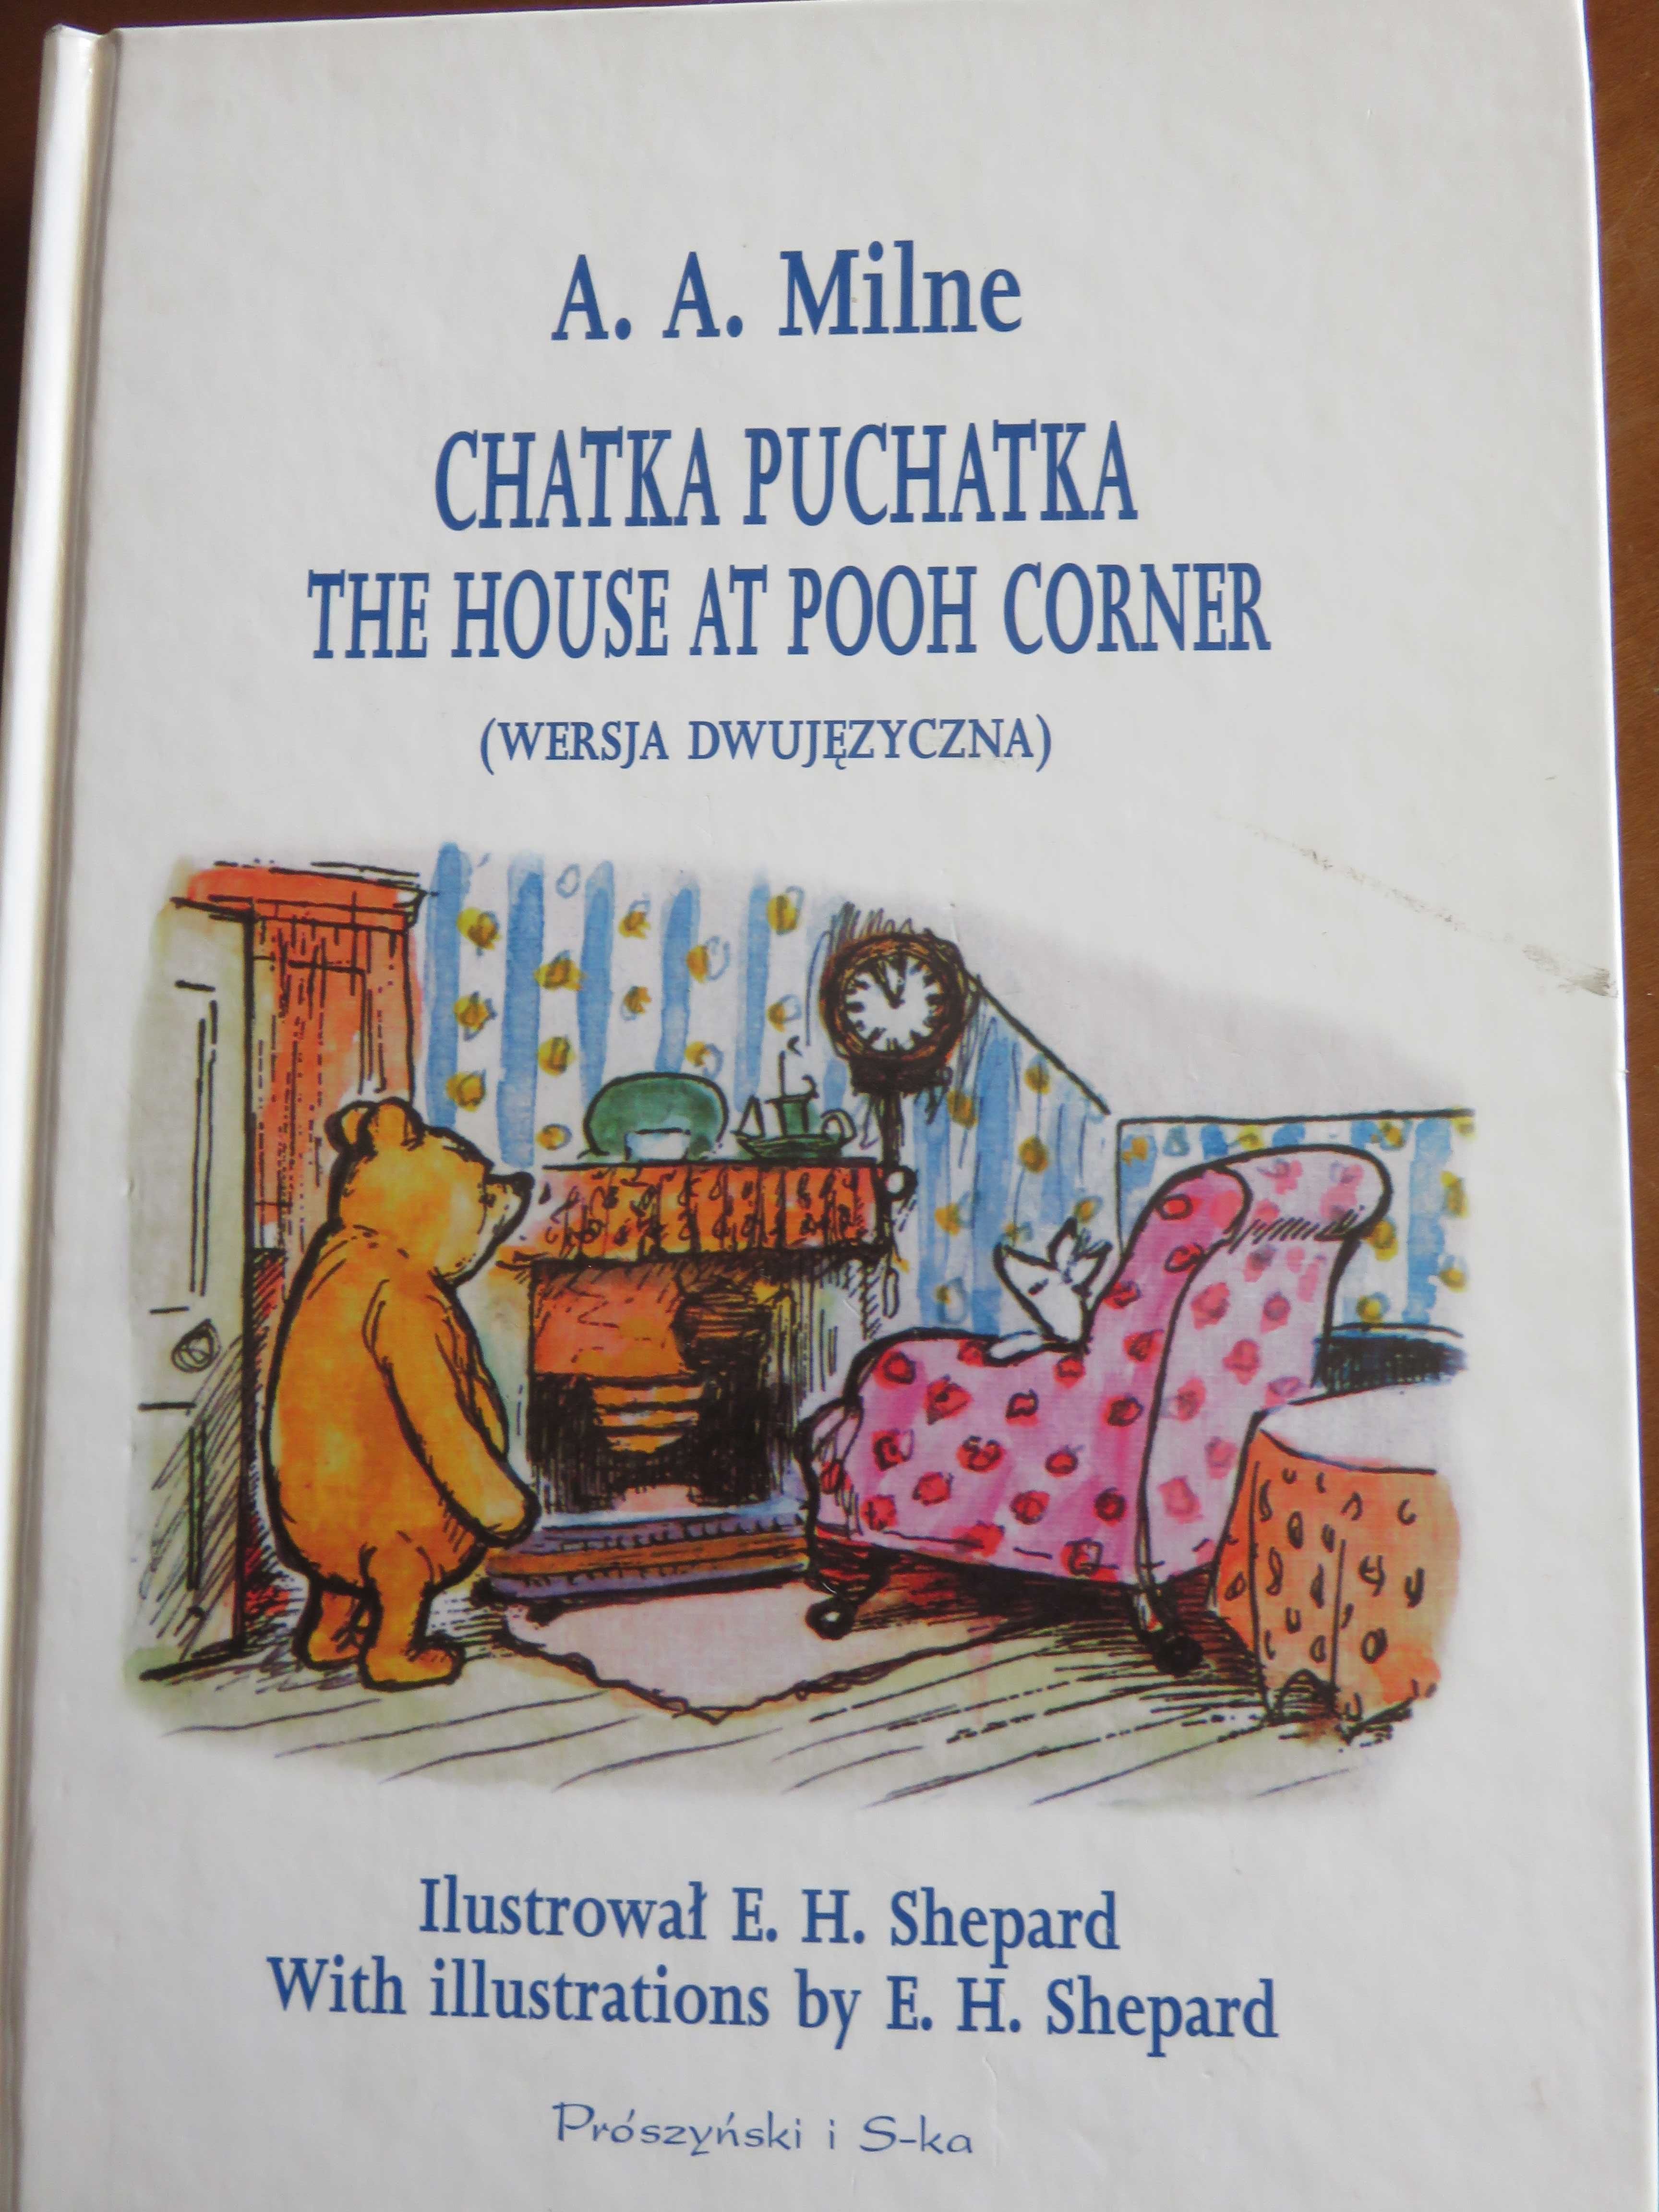 Chatka Puchatka  - The house at pooh corner A.a.Milne